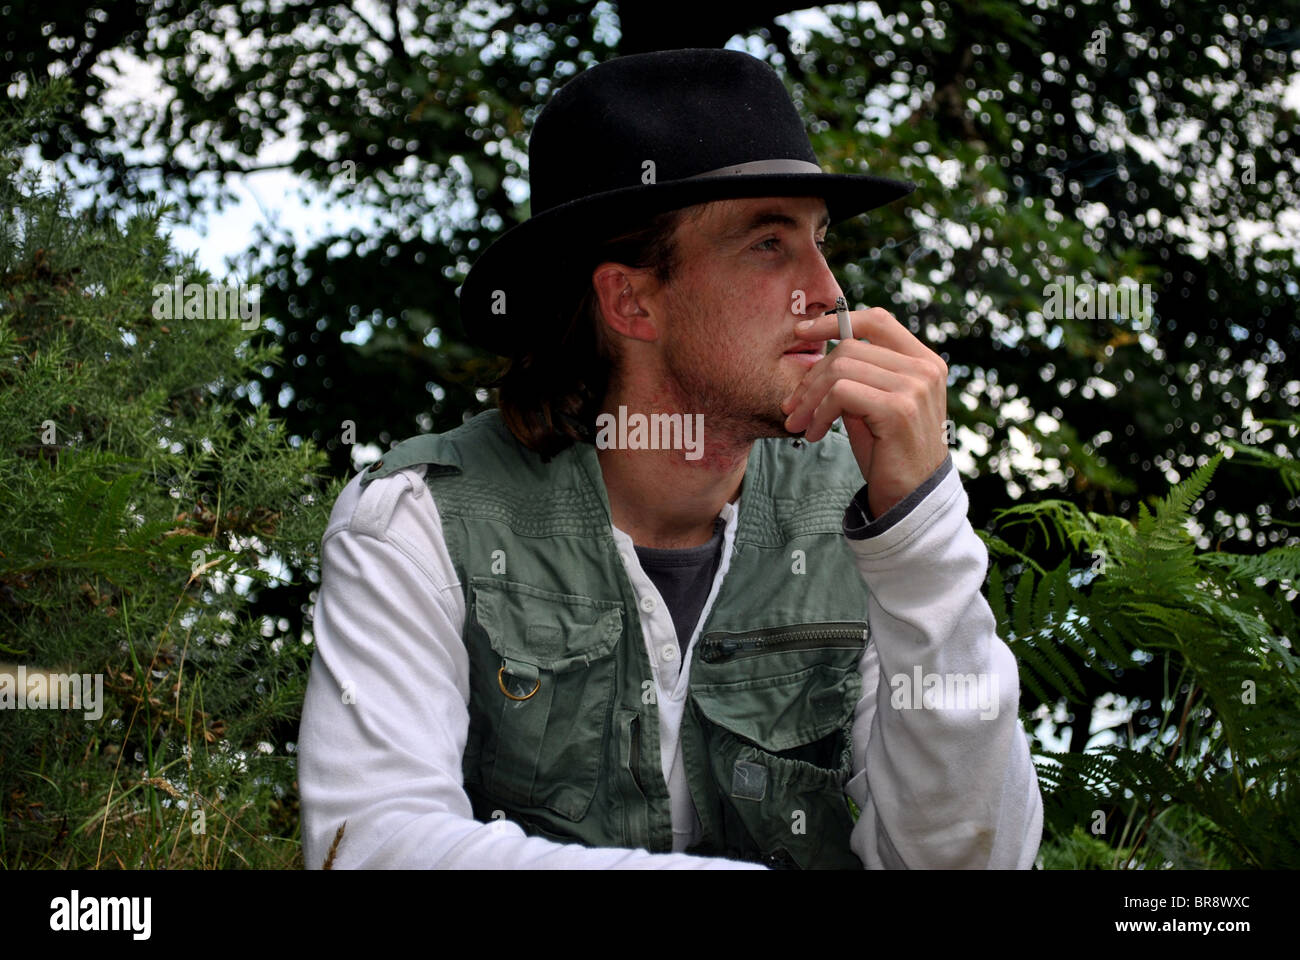 relaxed man smoking a cigarette Stock Photo